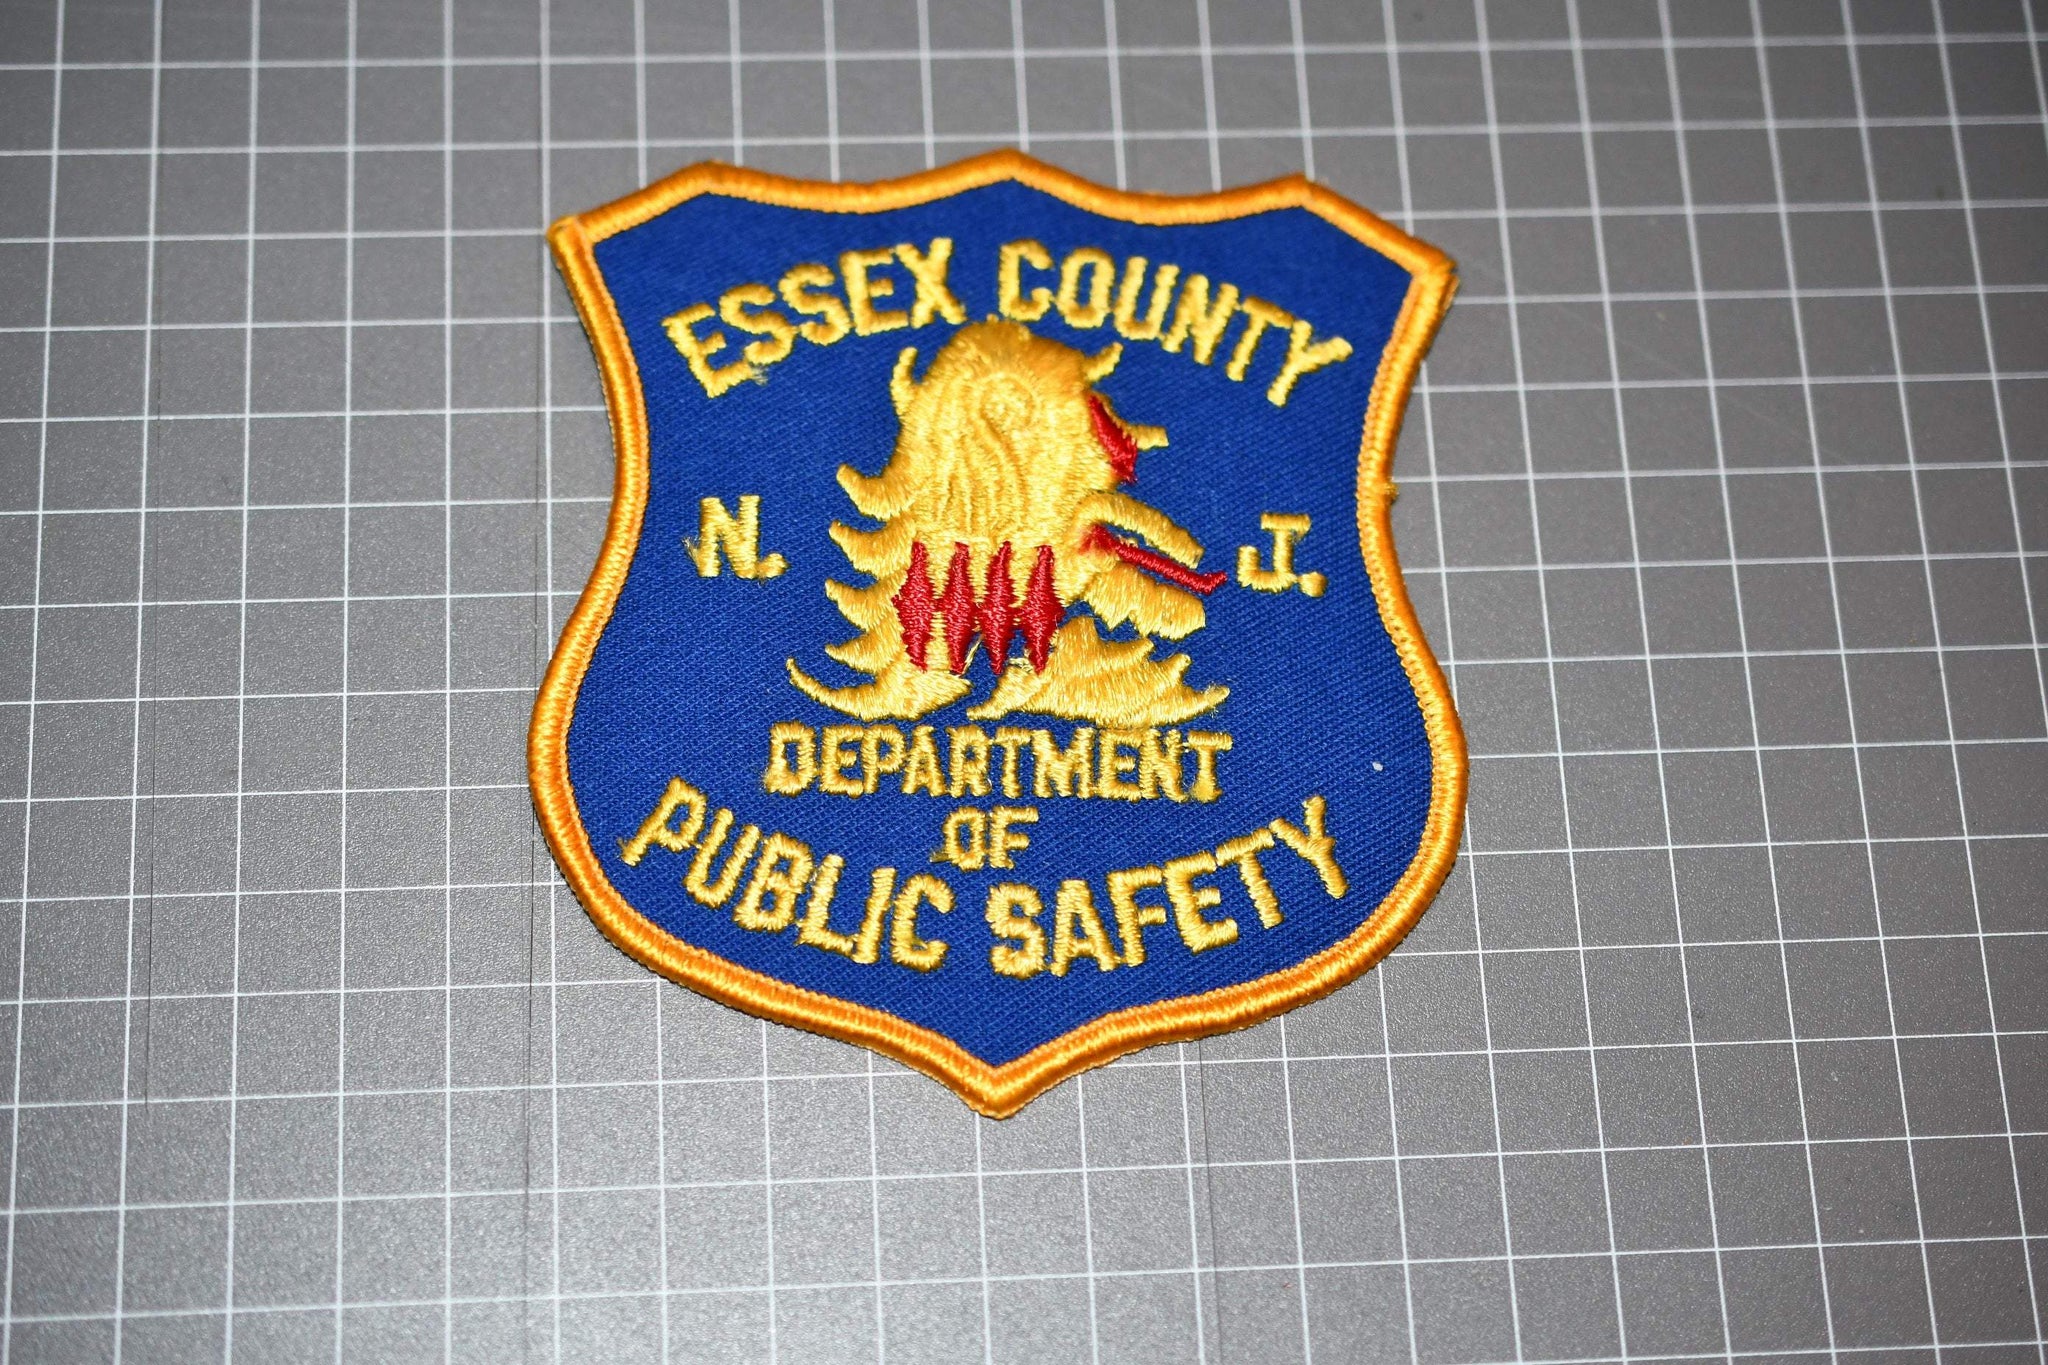 Essex County New Jersey Department Of Public Safety Patch (B1)